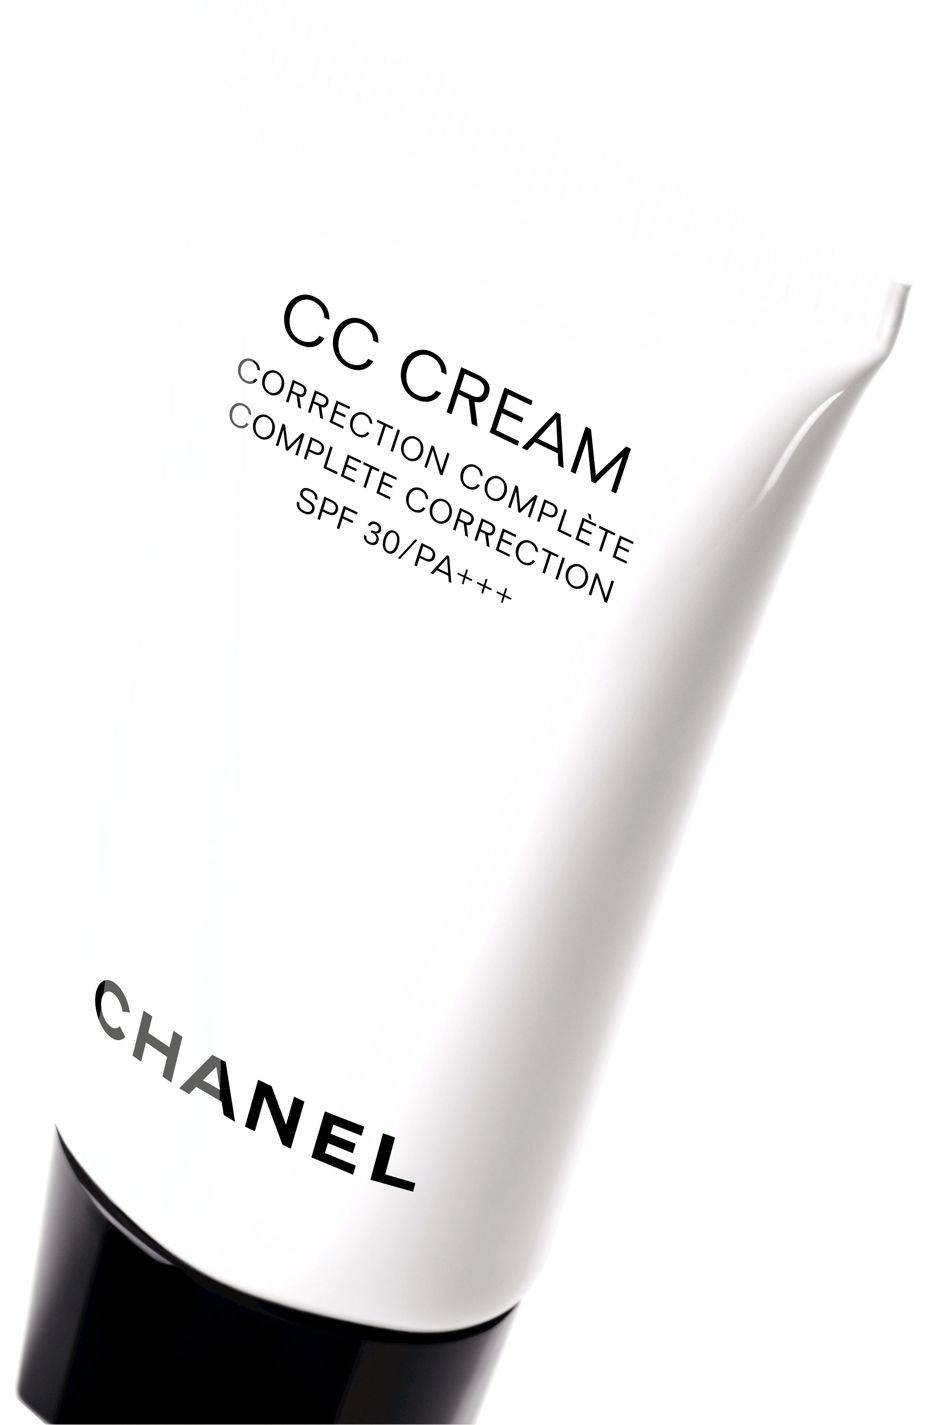 The hugely successful CC Cream by CHANEL that has offered Asian ladies Complete Correction since 2011, is introduced with a lighter and slightly pinker 12 Beige Rose version